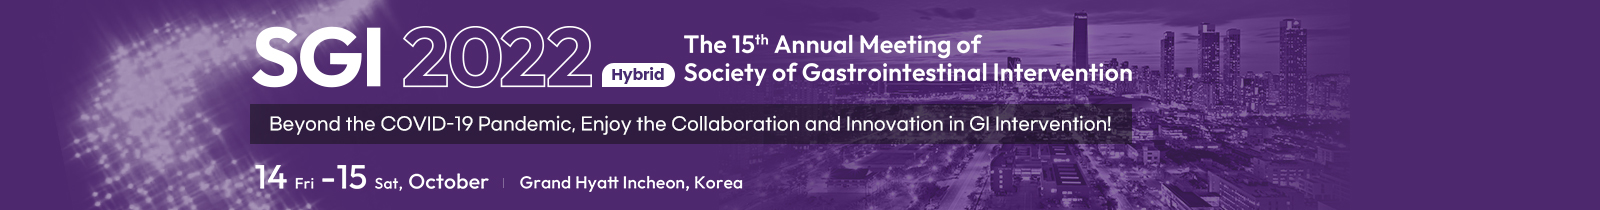 SGI 2022 The 11th Annual Meeting of Society of Gastrointestinal Intervention